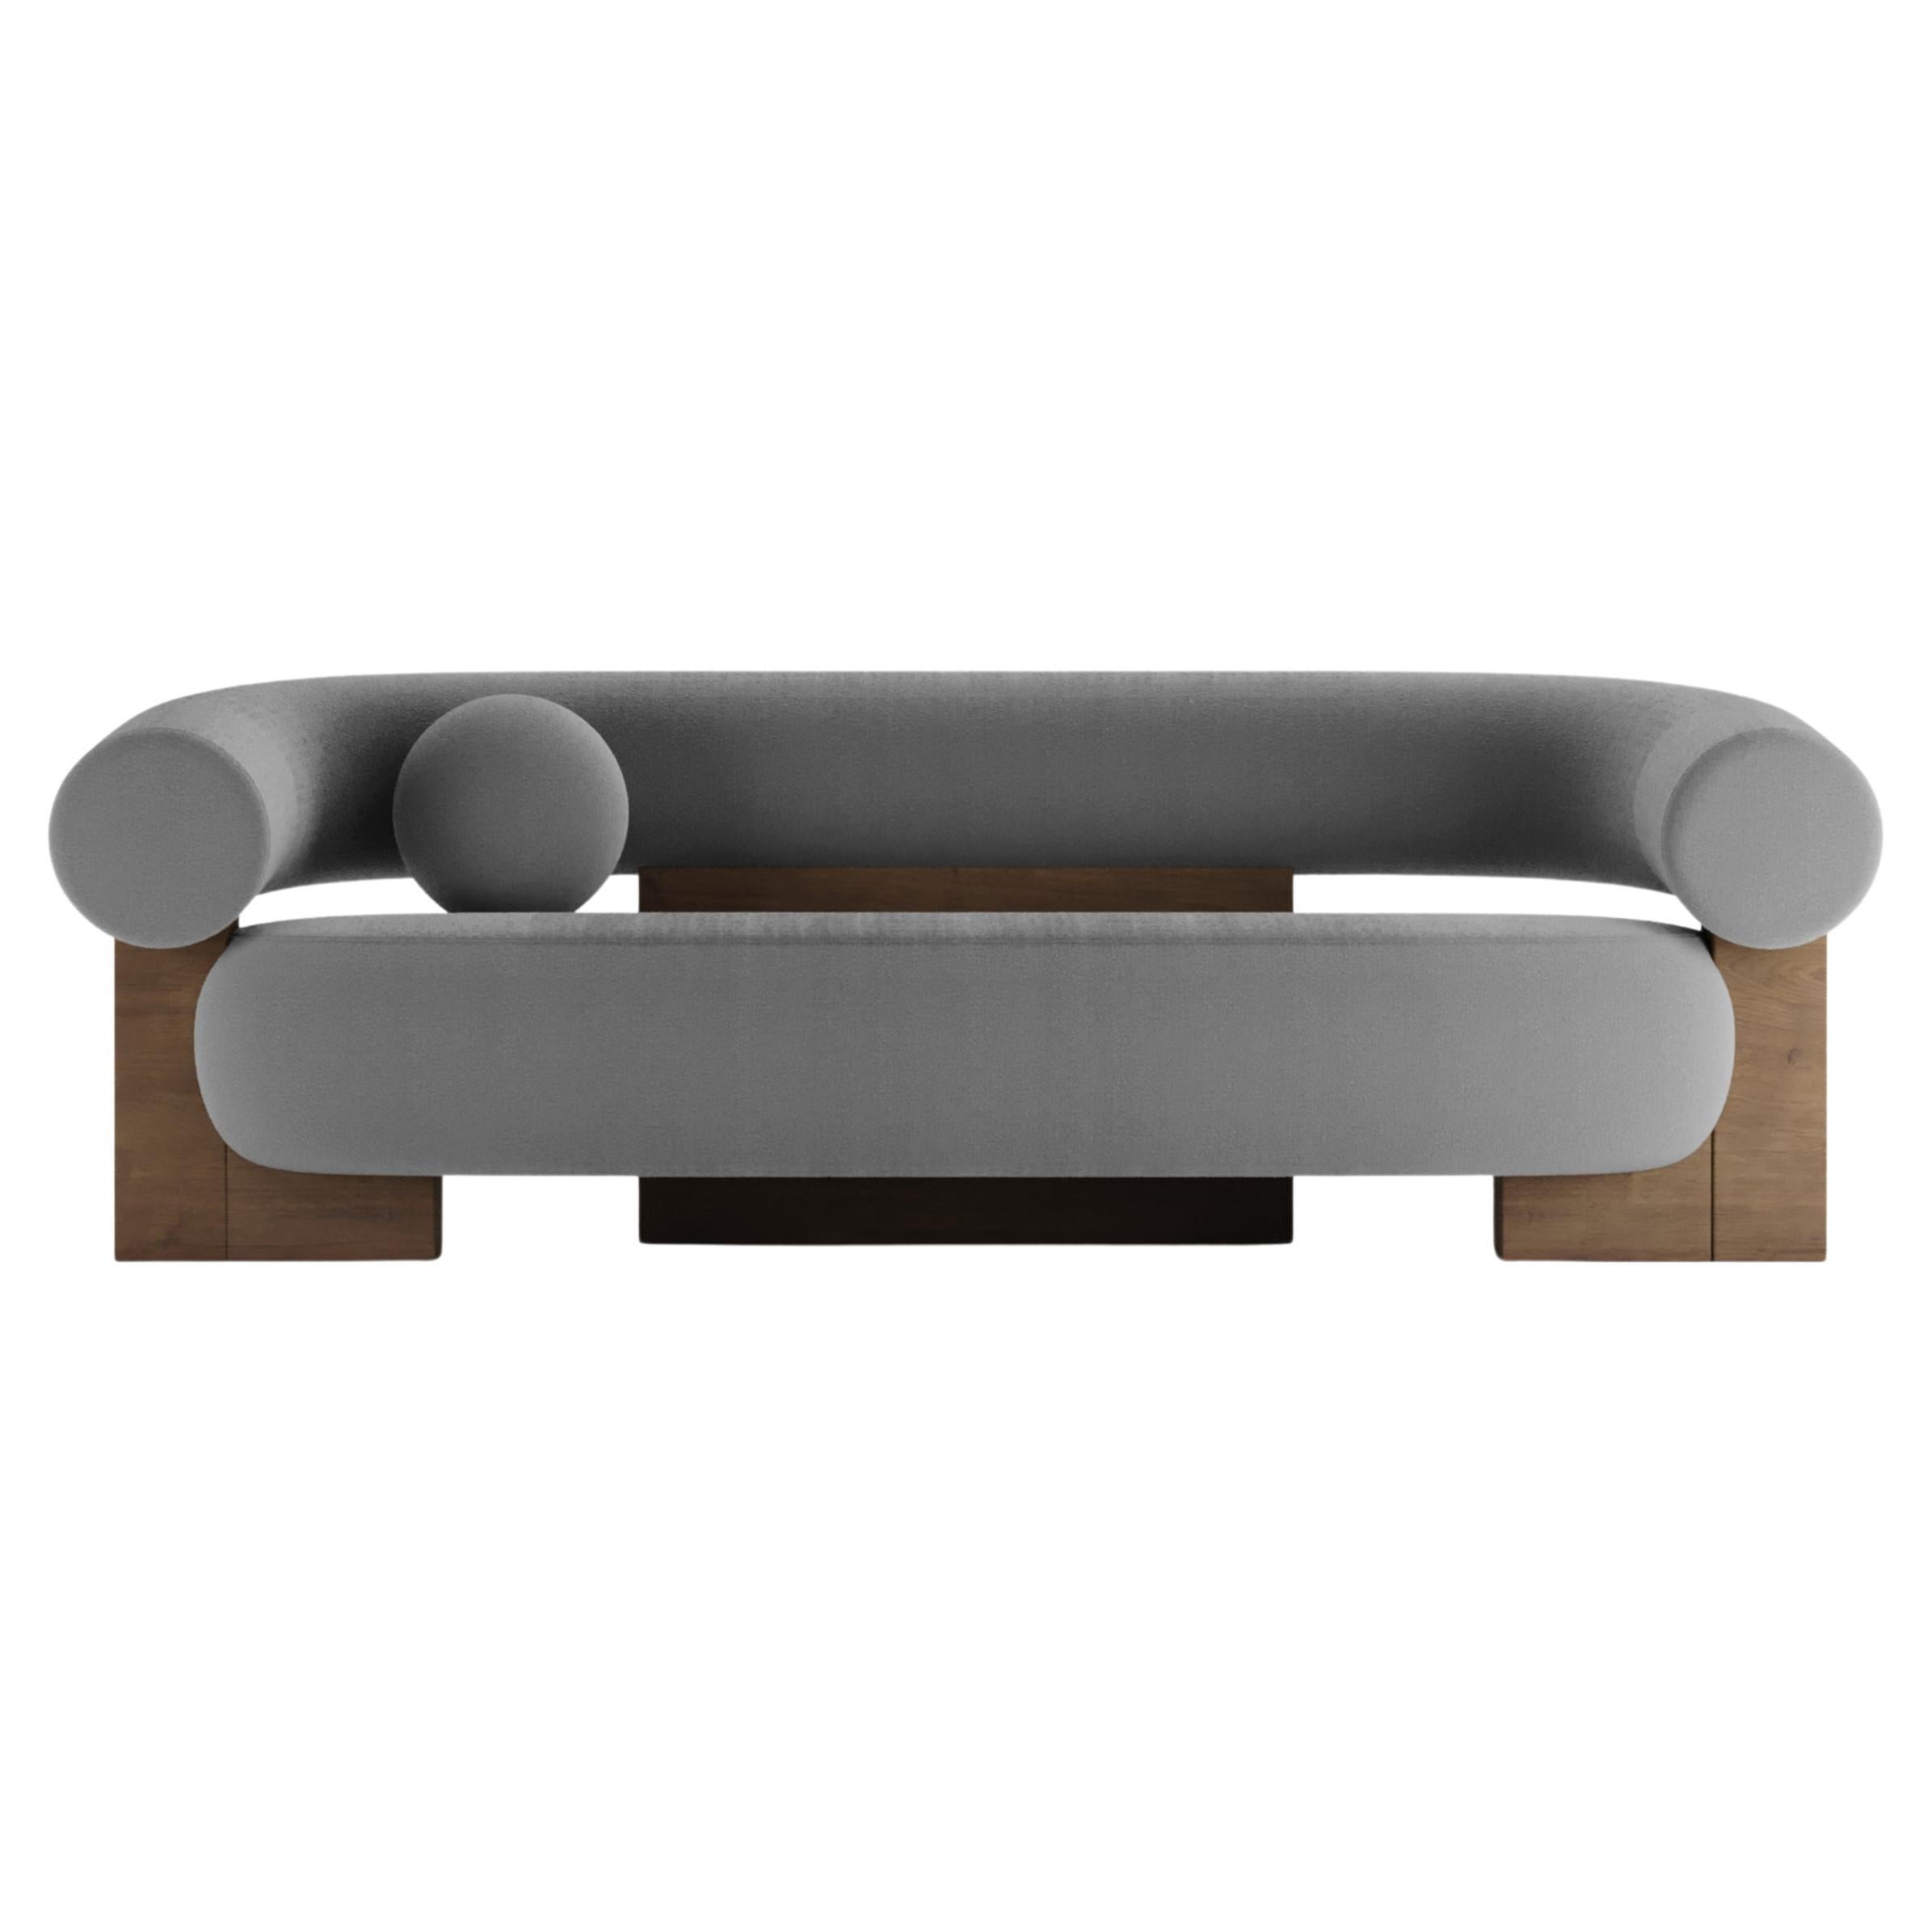 Contemporary Modern Cassete Sofa in Light Grey & Wood by Collector Studio